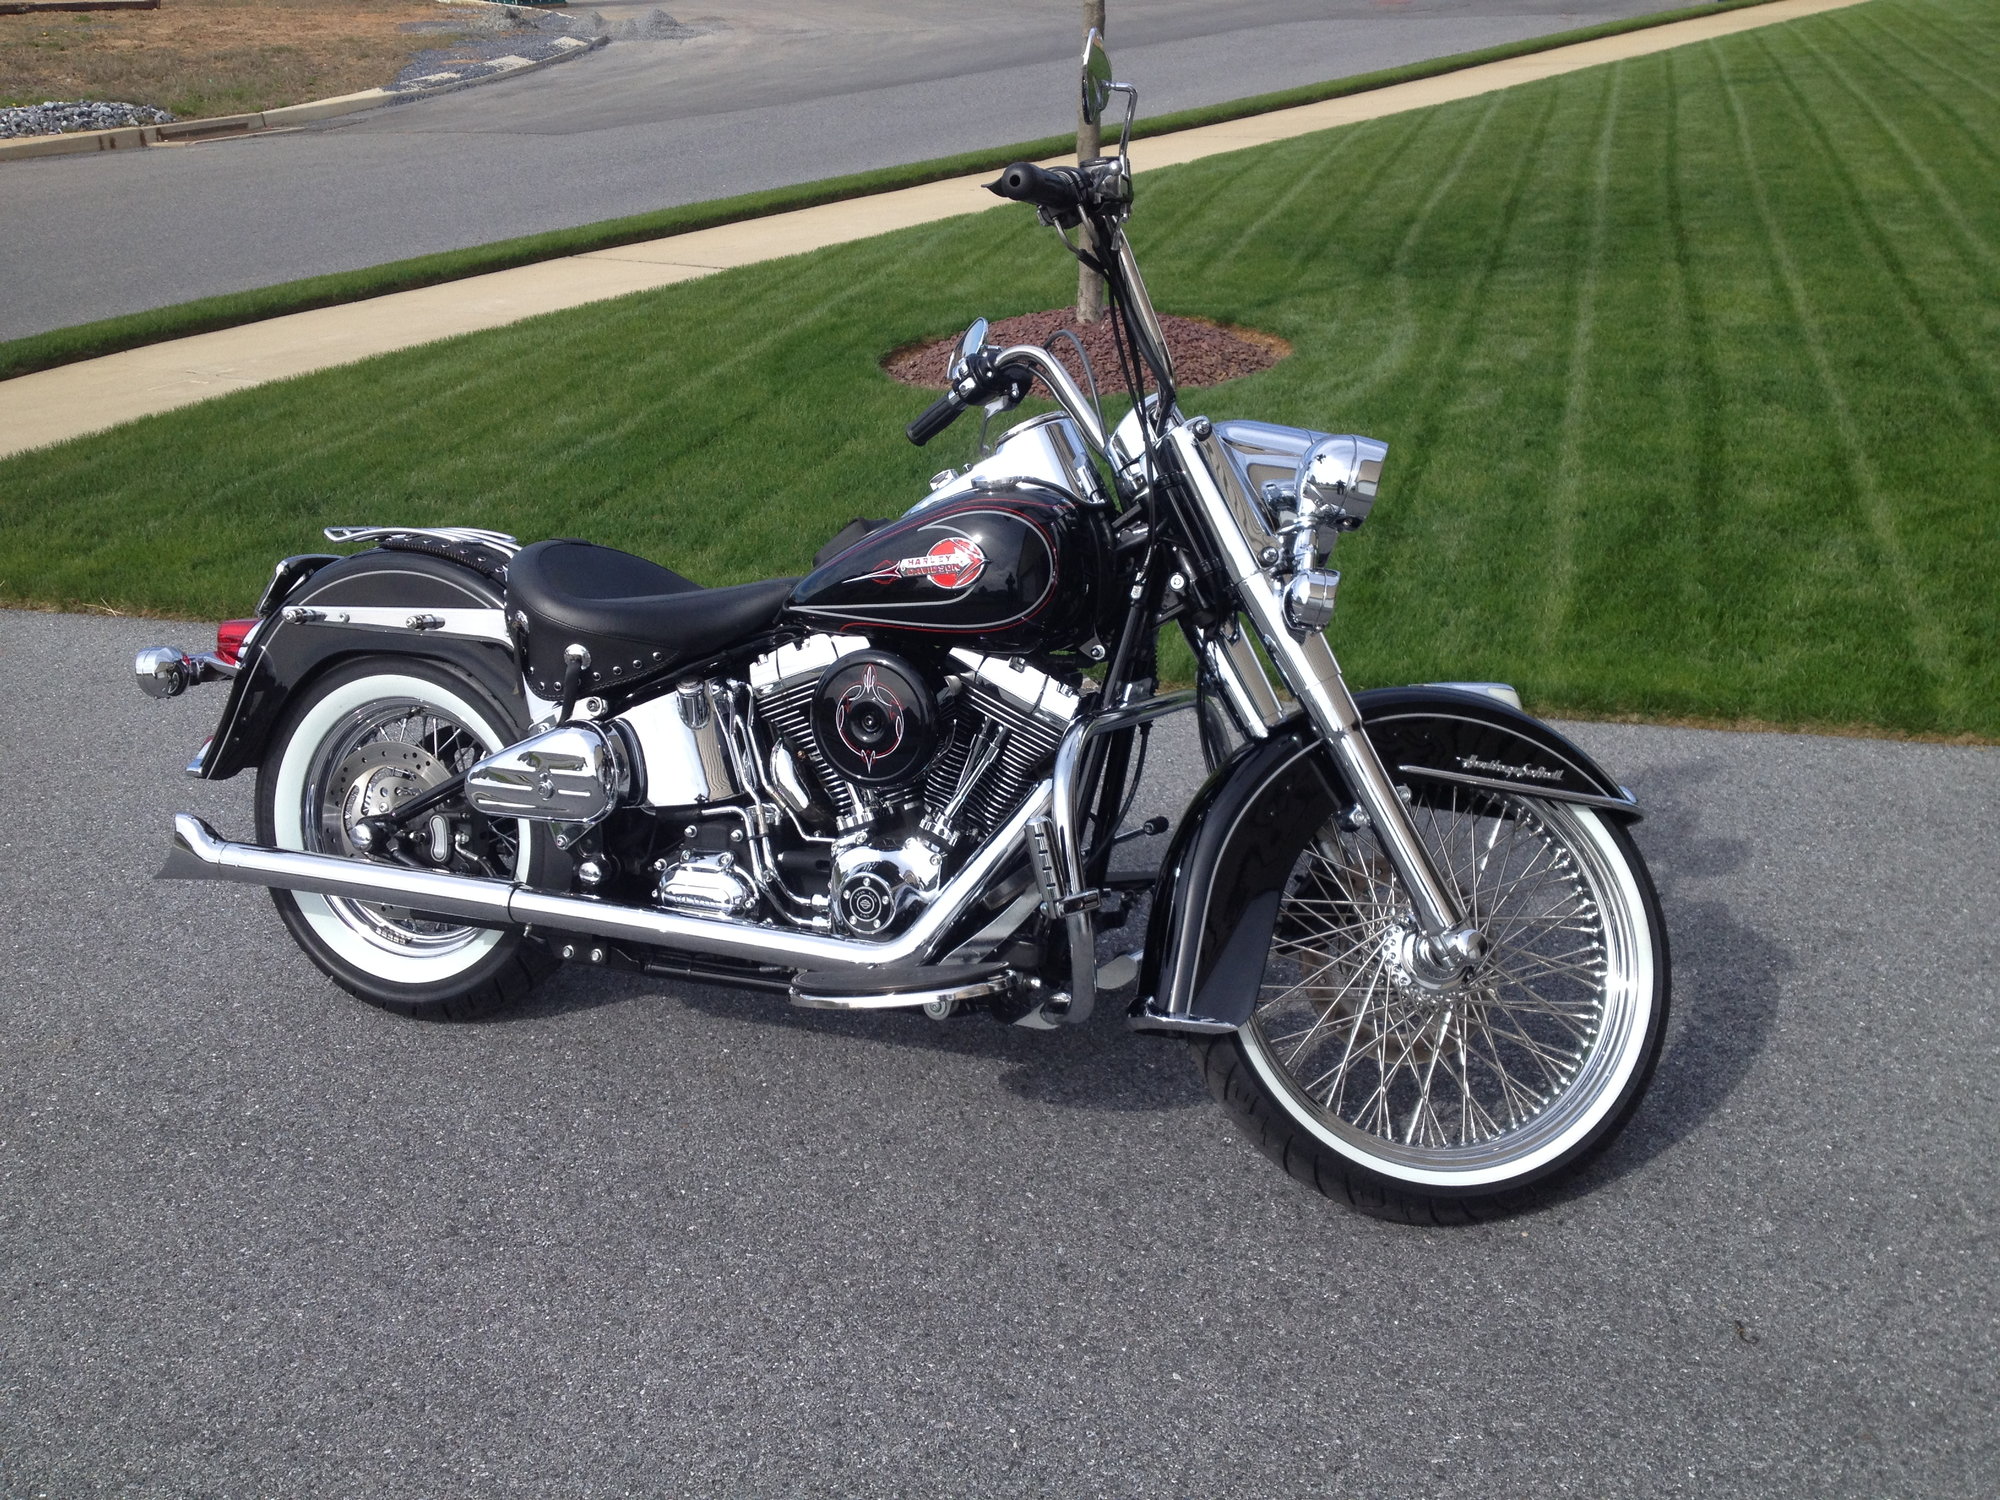 21" rim and white wall tire question Harley Davidson Forums